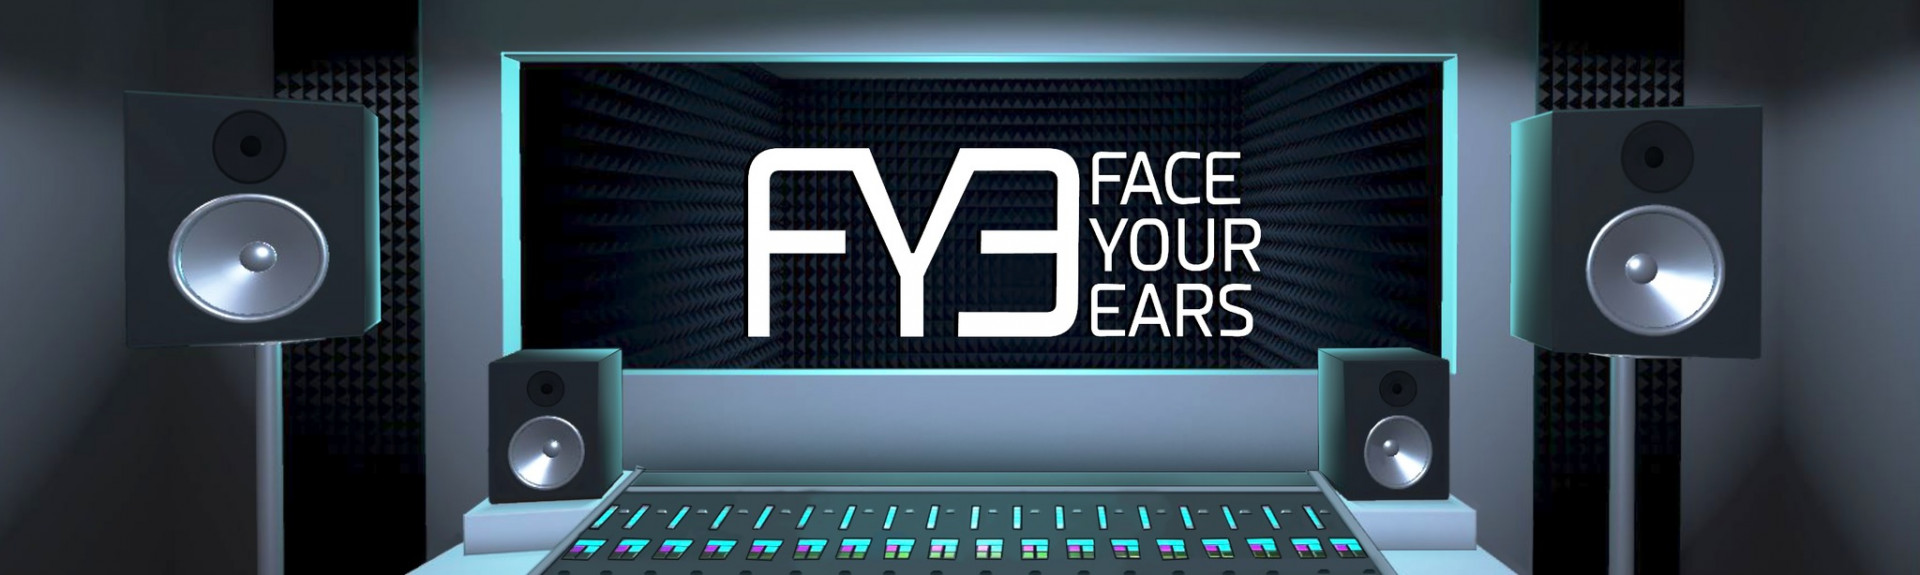 Face Your Ears